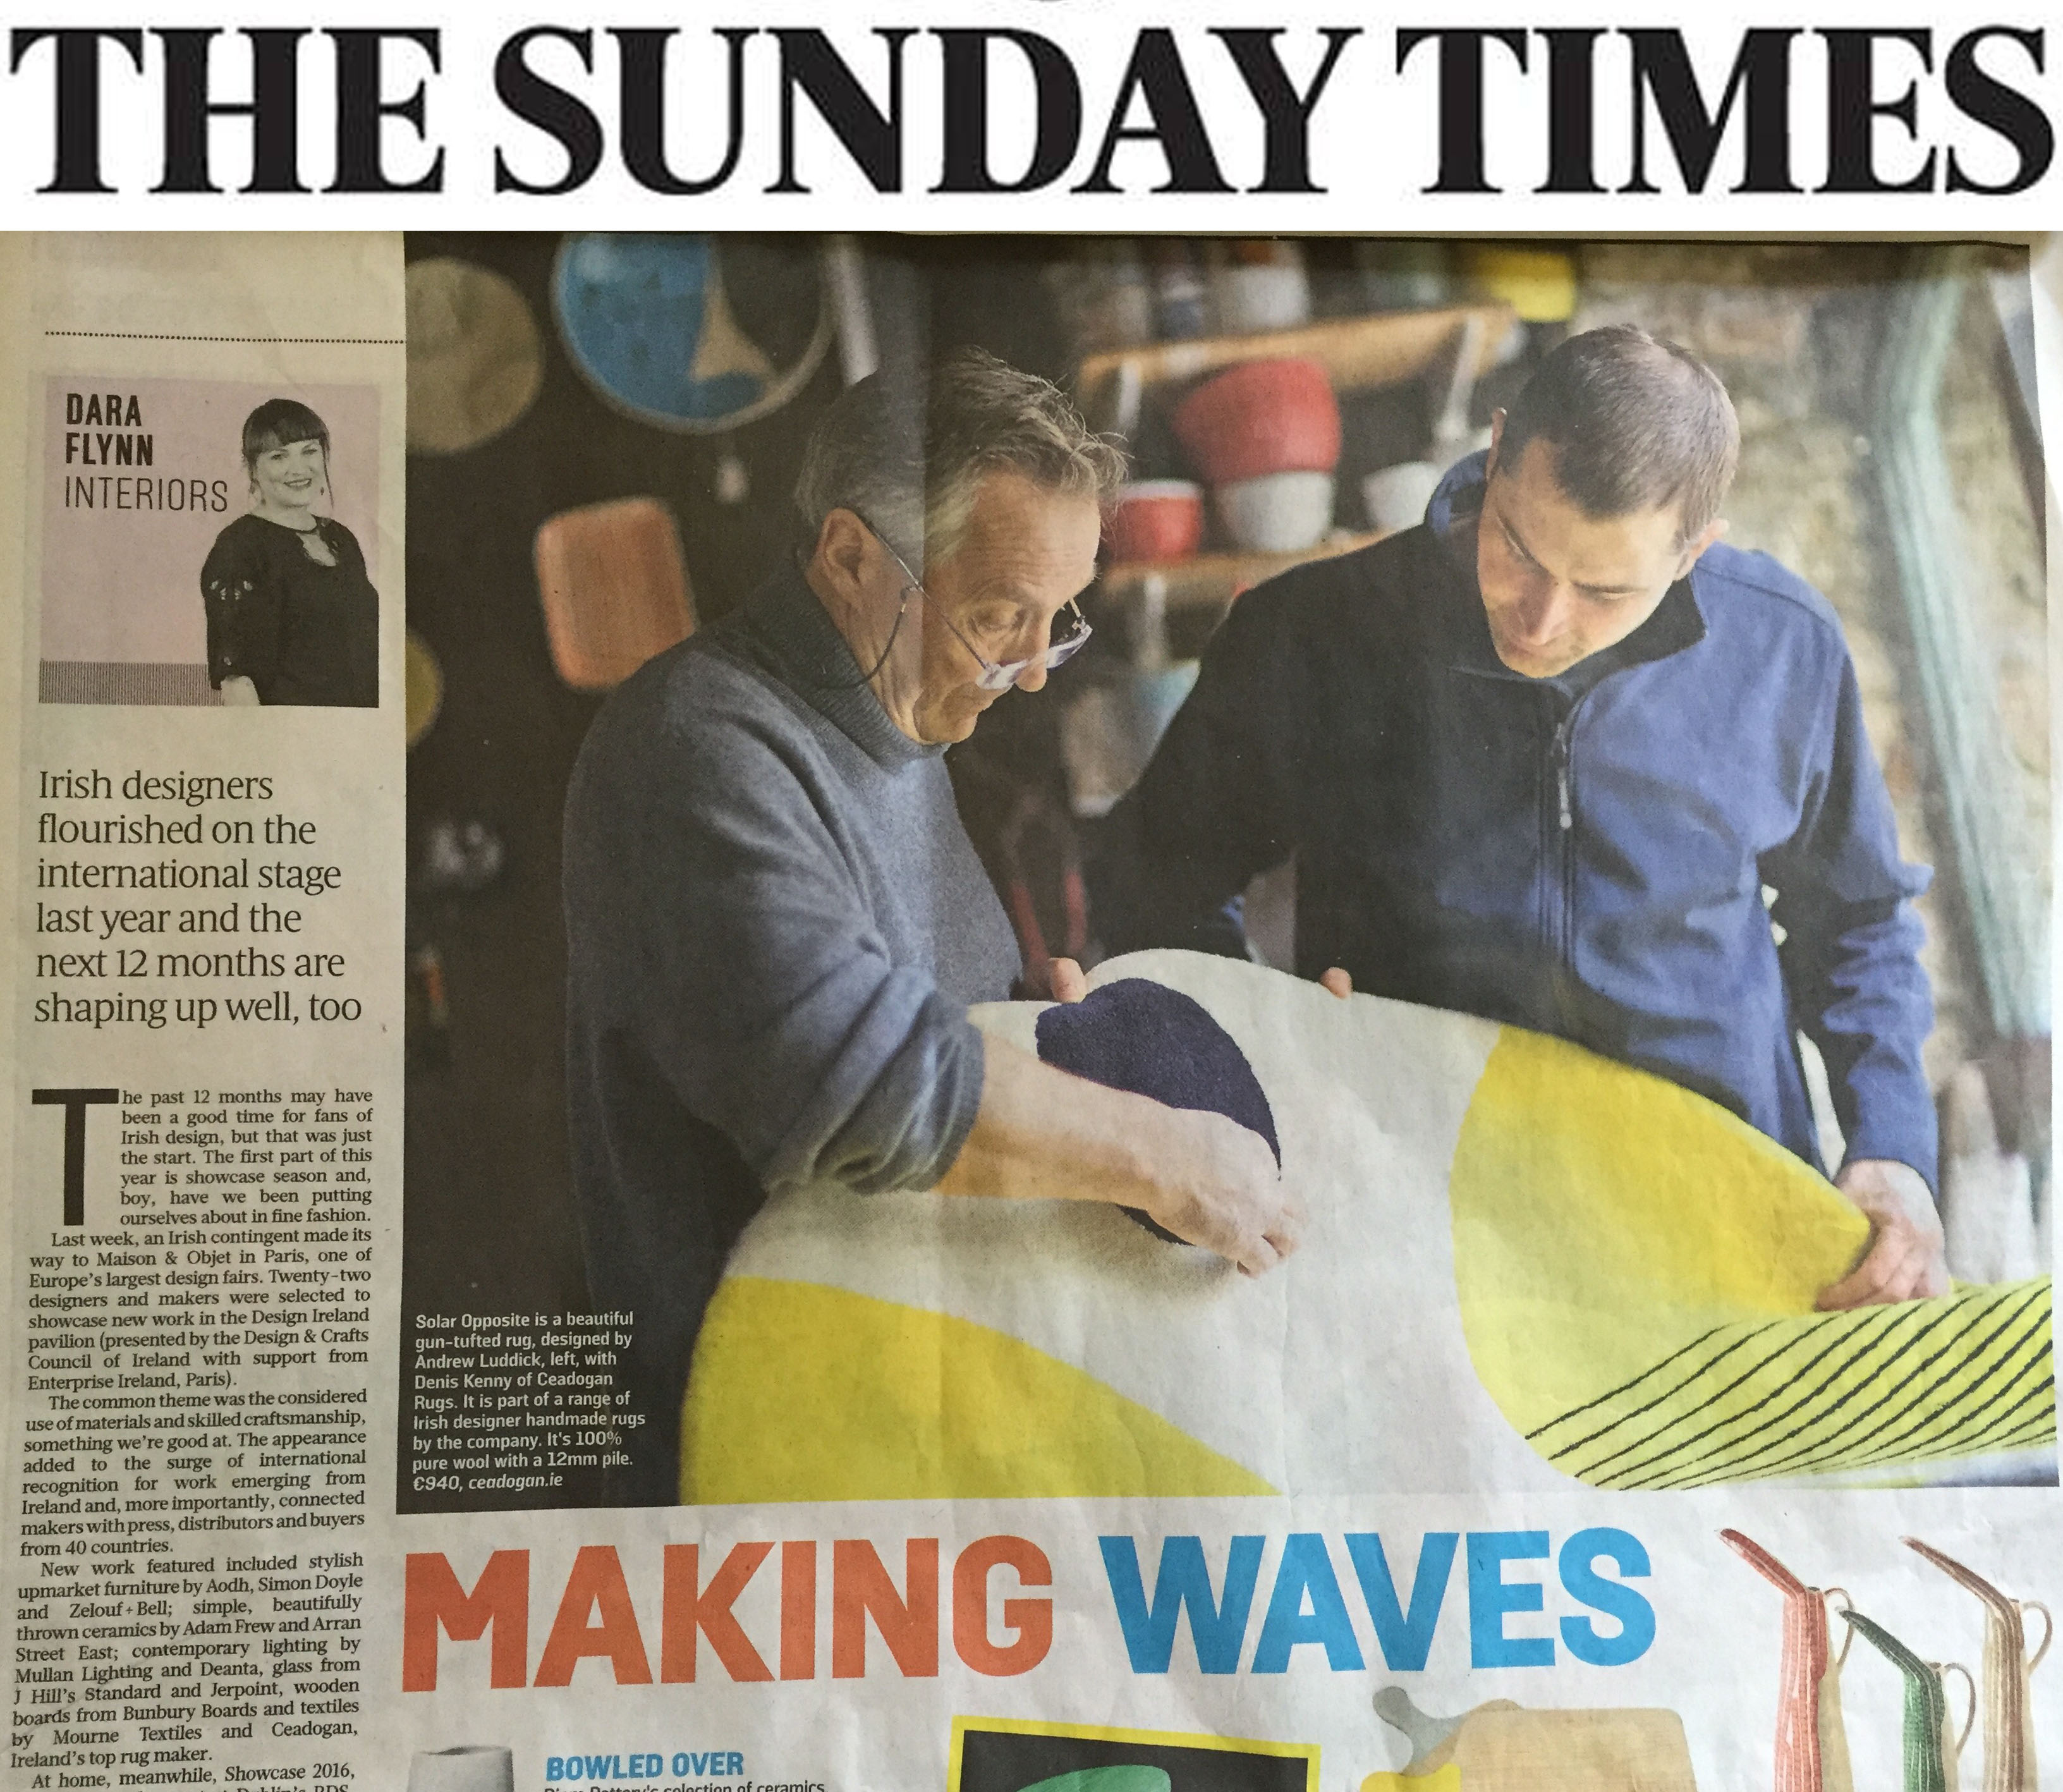 Sunday Times pic